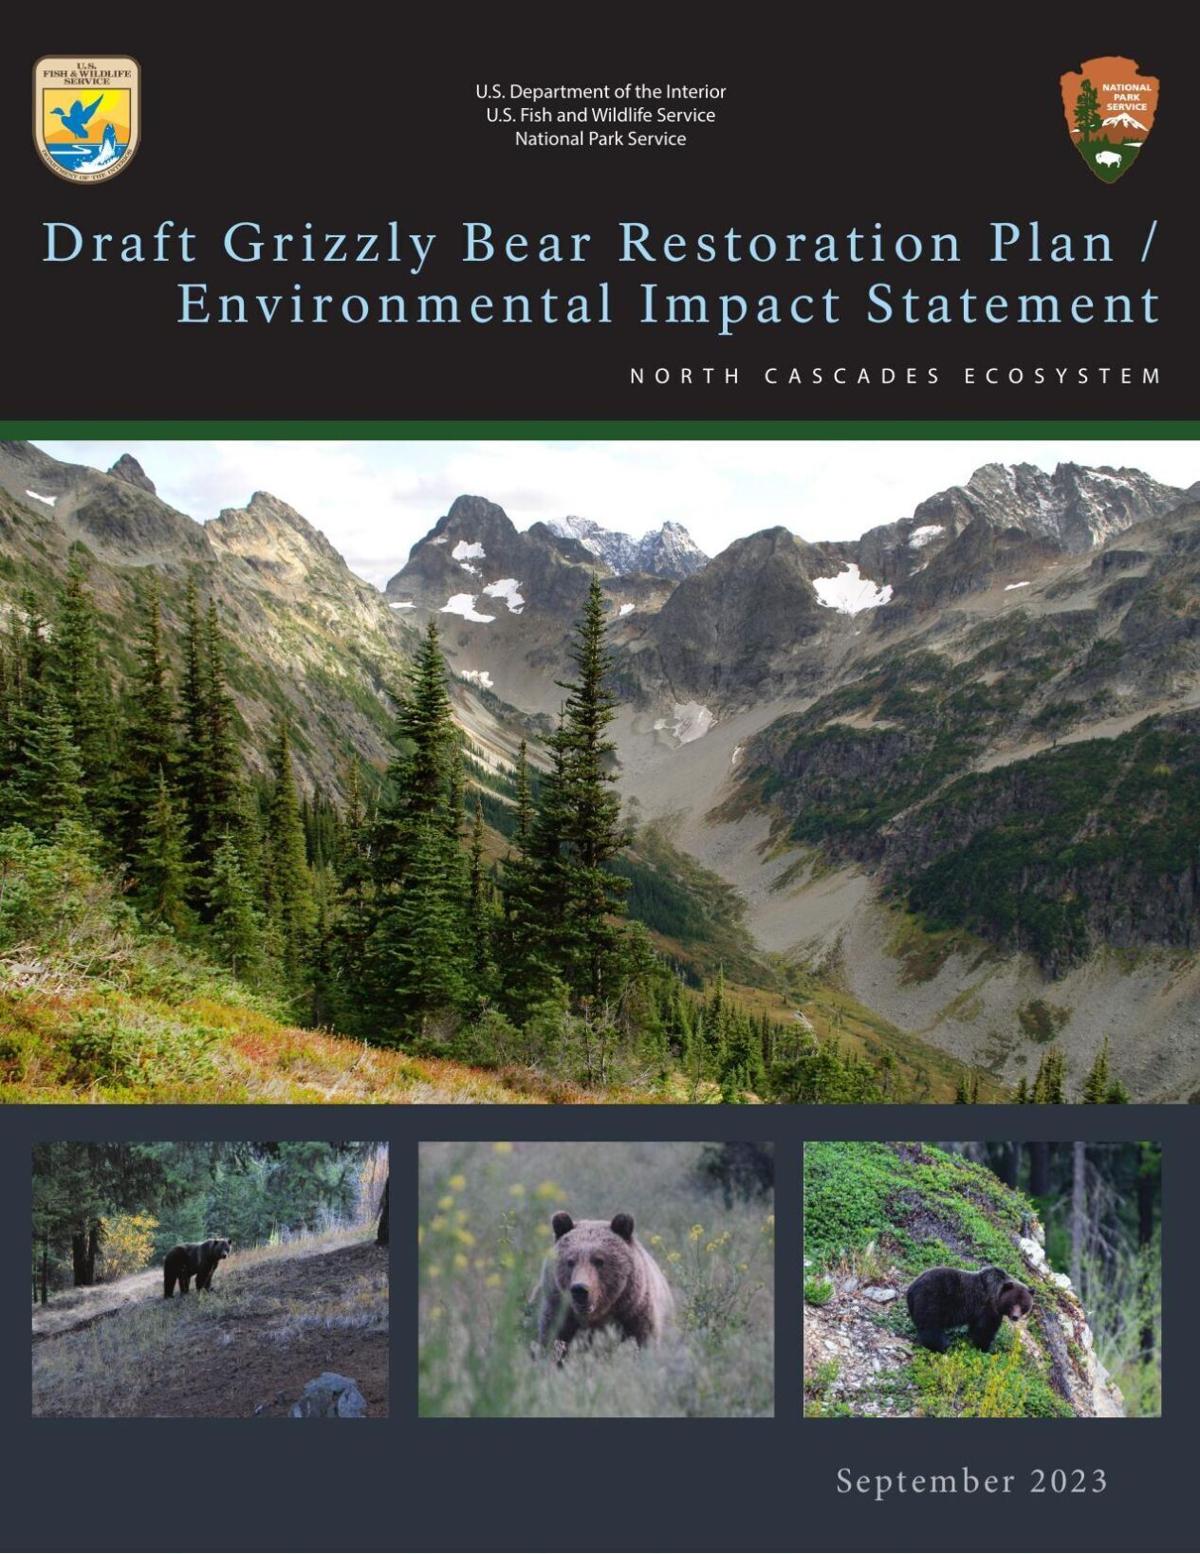 Support reintroducing grizzly bears to the North Cascades